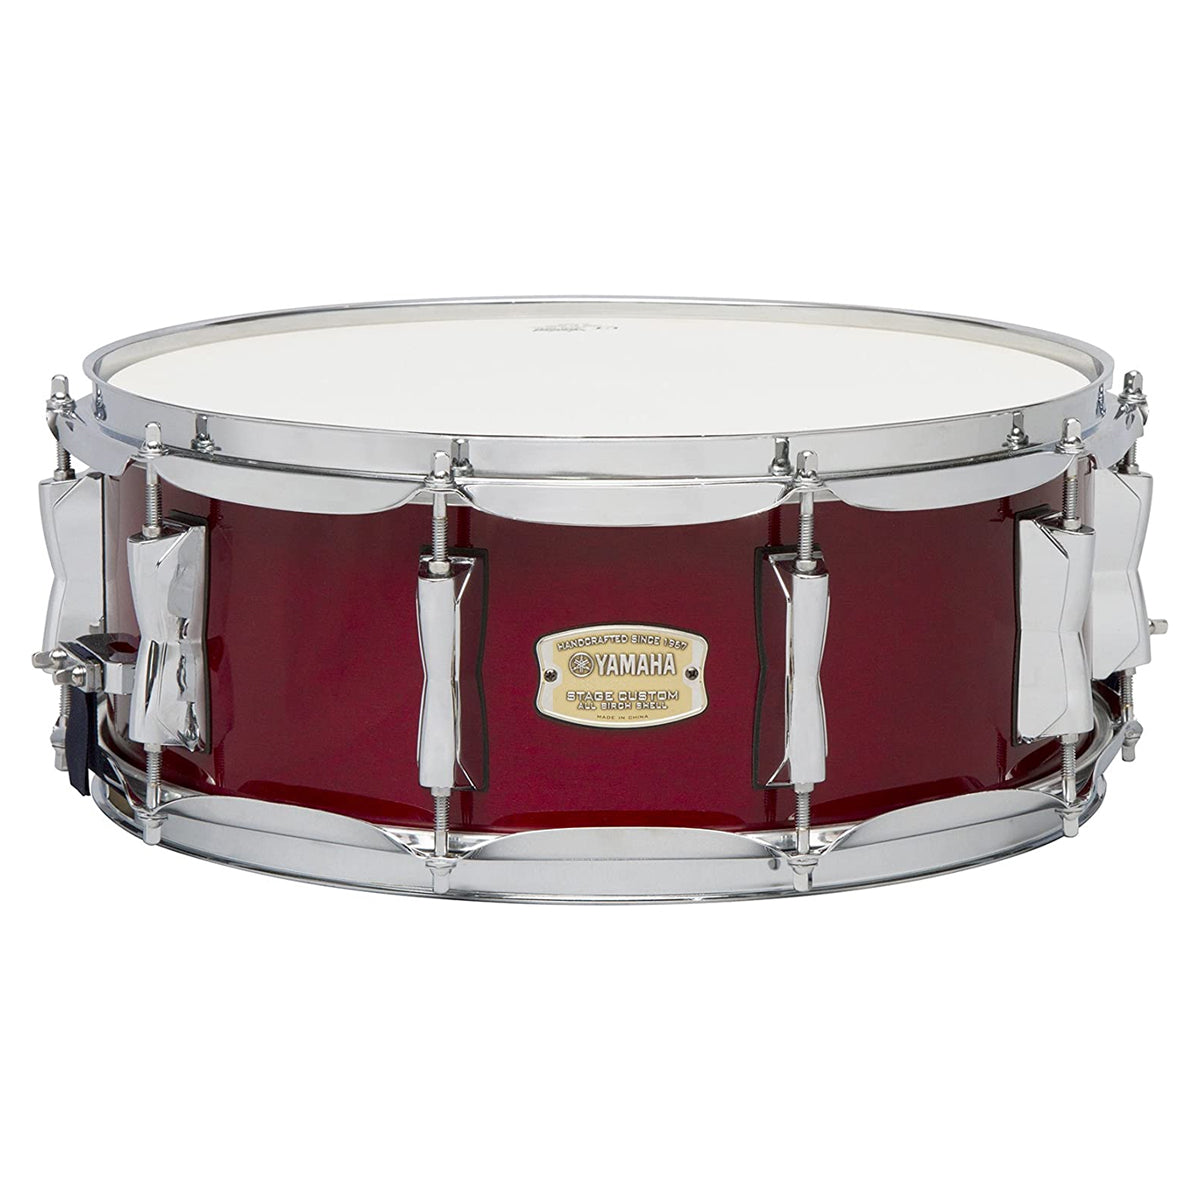 Yamaha Stage Custom 14"x5.5" Birch Snare Drum in Cranberry Red